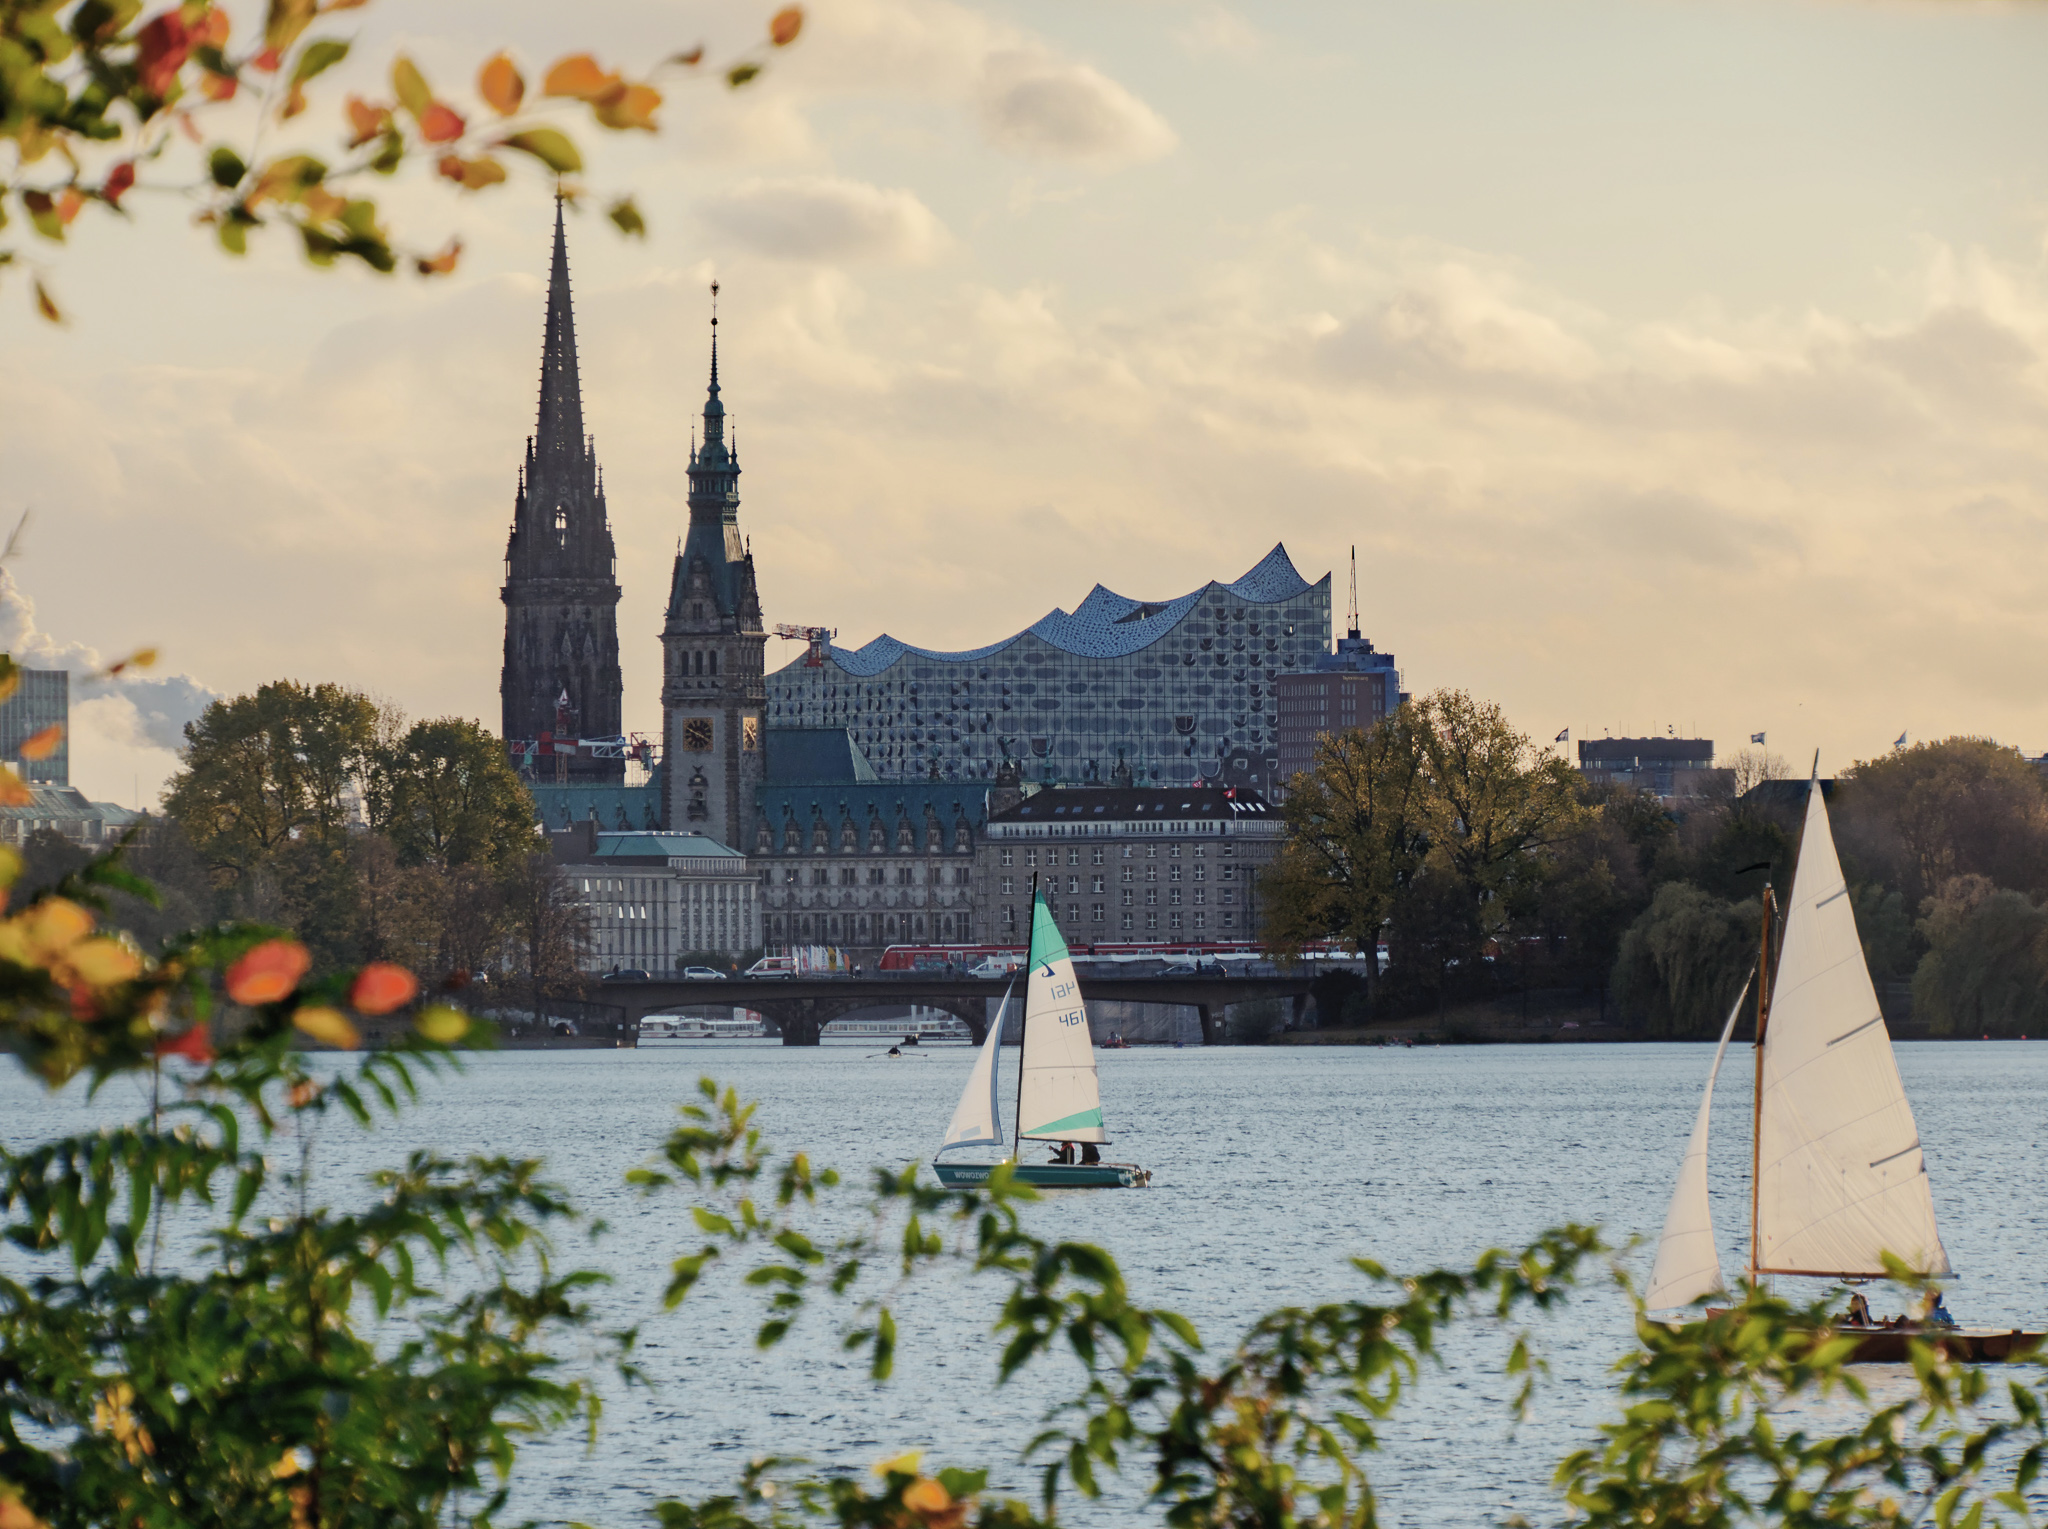  Outer Alster Lake in Hamburg